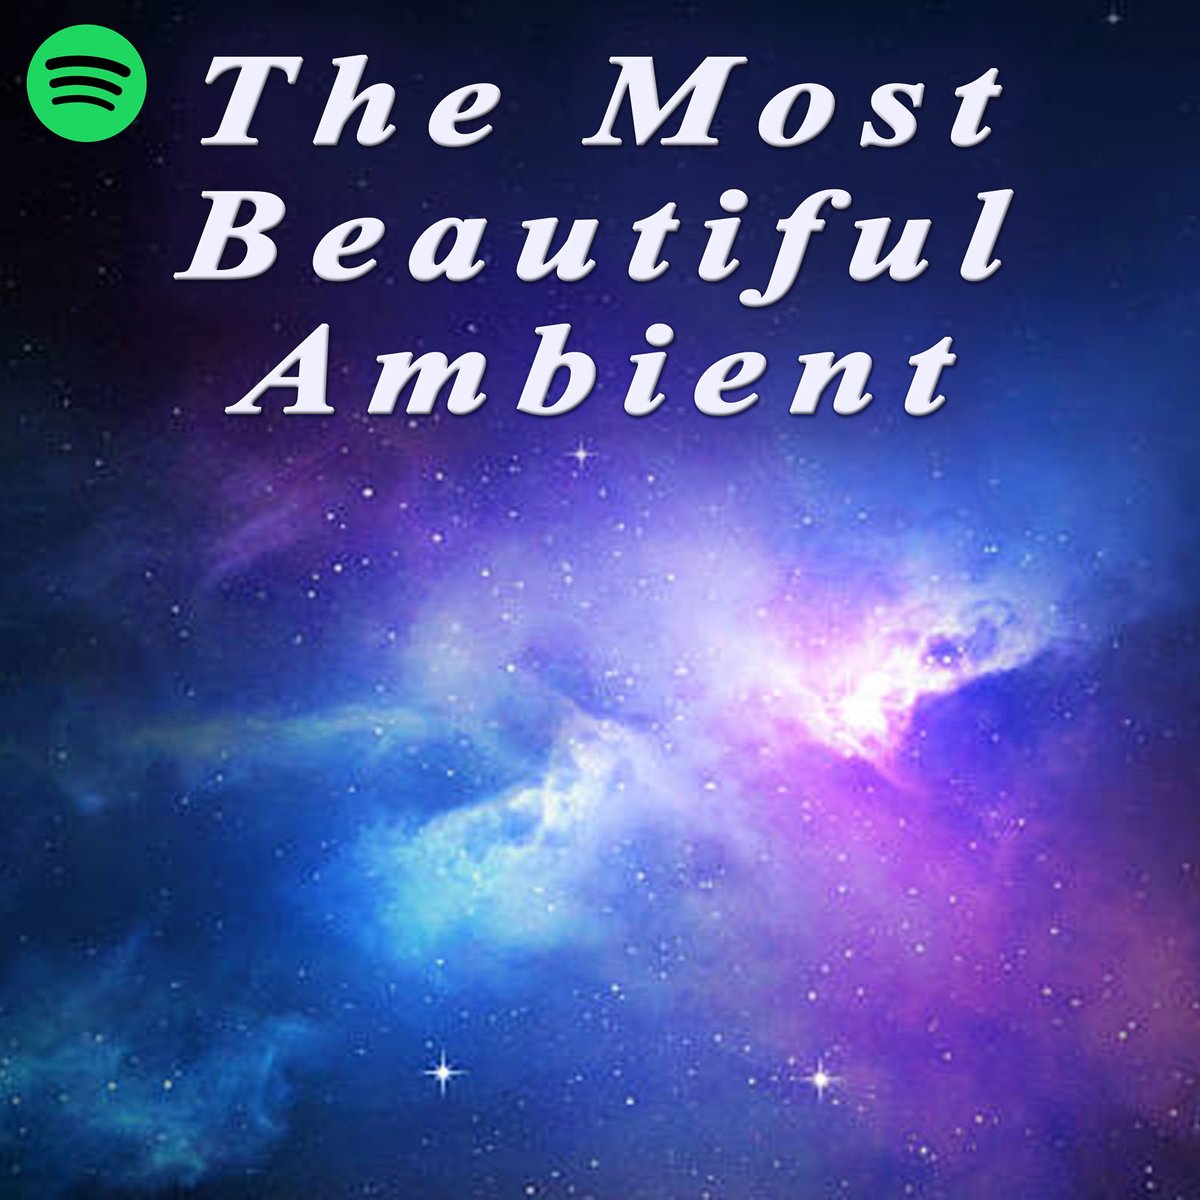 Some of the best of ambient & space music I found nowadays in 4 Spotify playlists: open.spotify.com/intl-fr/artist…

#ambient #spacemusic #spaceambient #ambientmusic #ambientsoundscapes #relaxingmusic #ambientelectronic #spaceambientmusic #ambientplaylist #ambientplaylists #spotifyambient